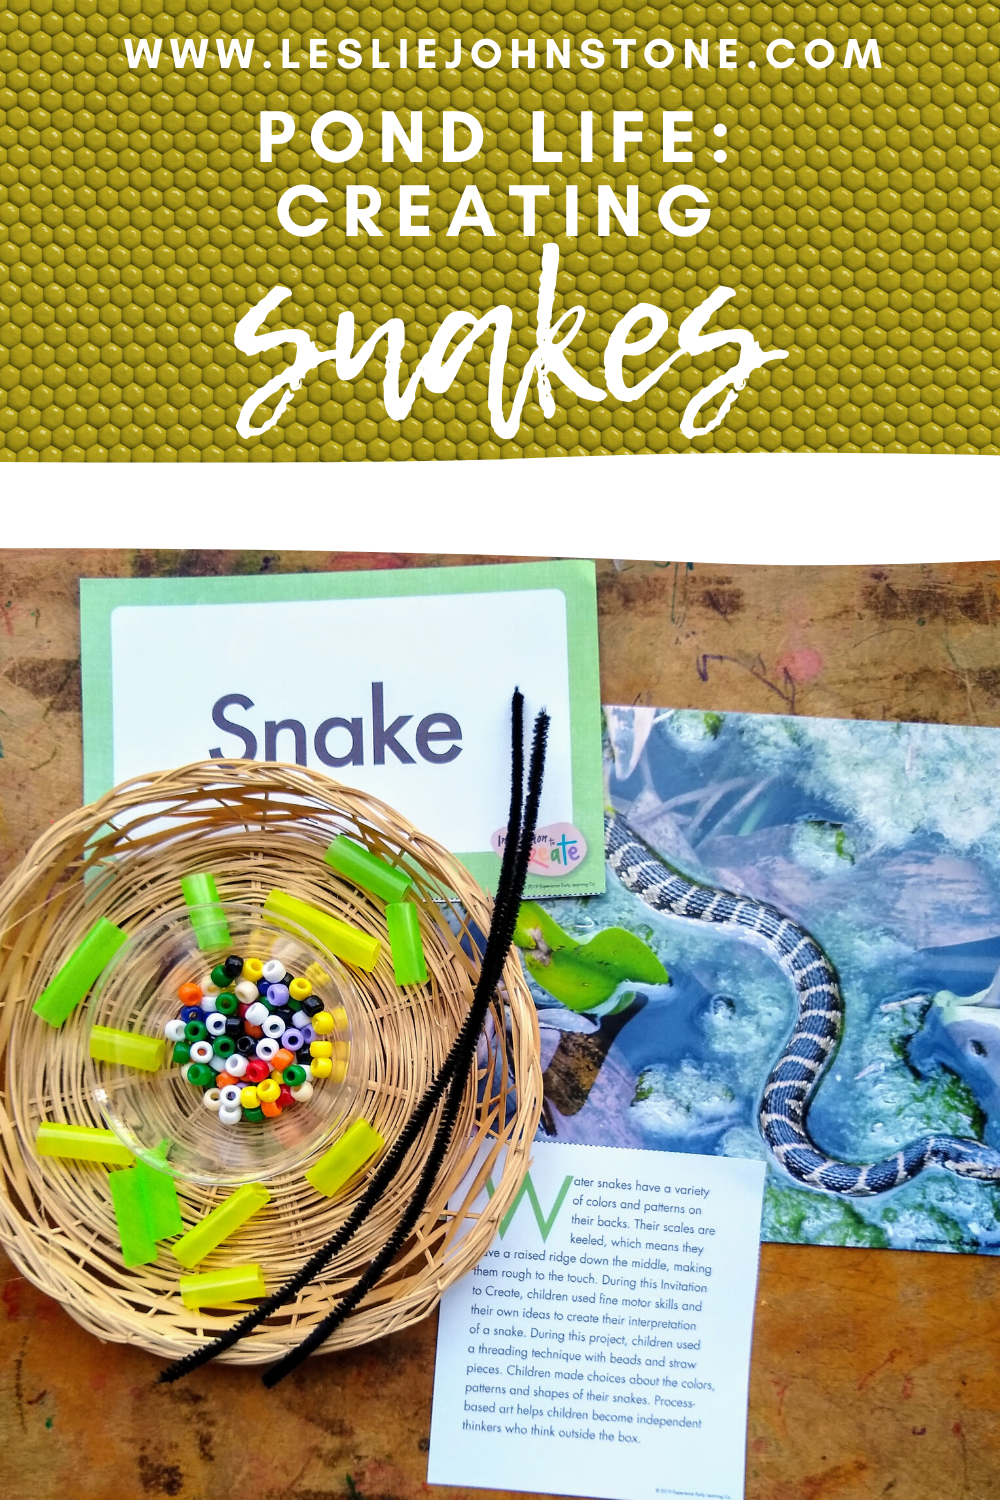 Pond Life: Creating Snakes